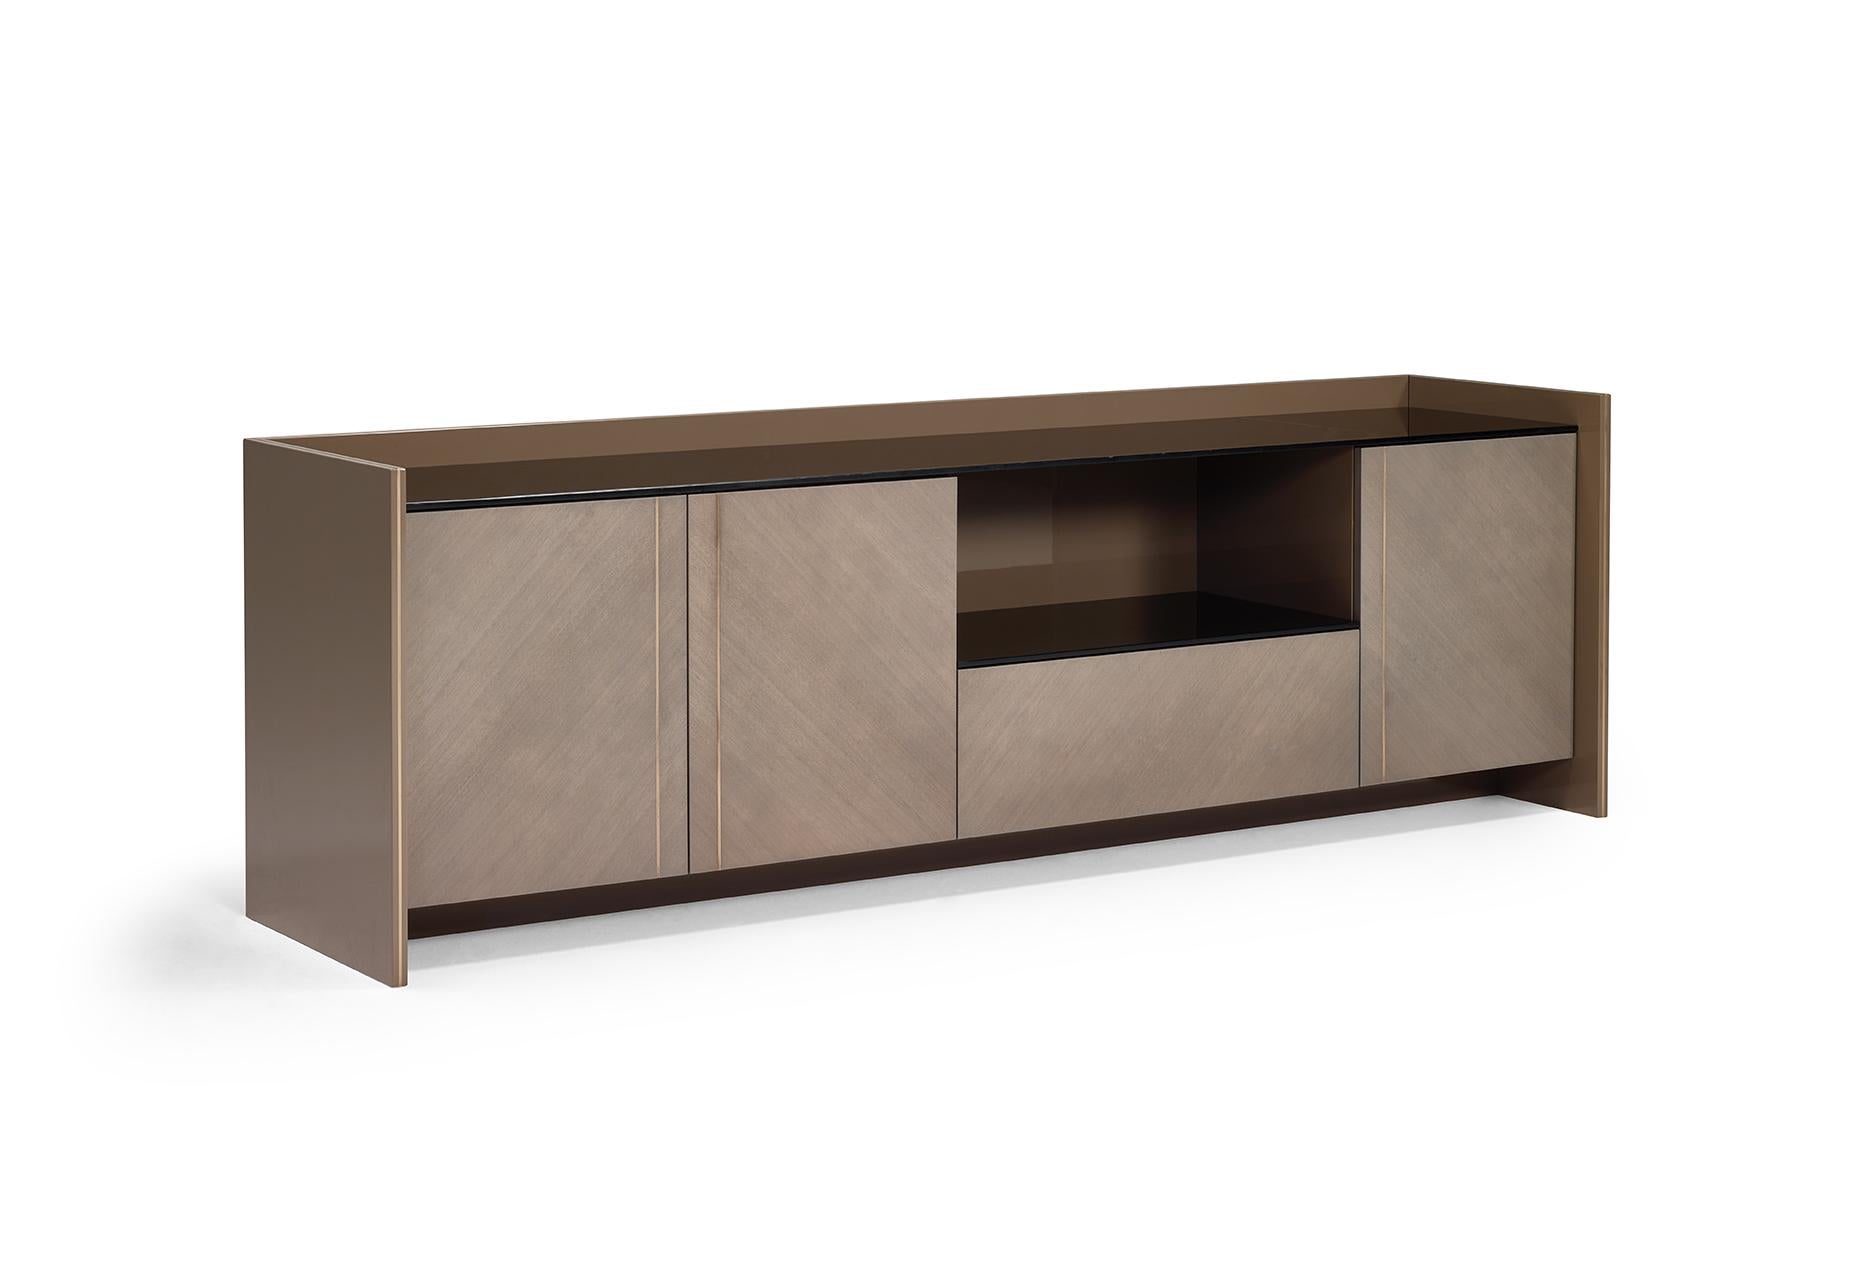 Exquisite brass details and sober-lines design combine in this eye-catching ASTAIRE sideboard. The embracing wooden structure and the doors can combine different finishes for an exclusive result. Astaire is composed by three doors and one deep